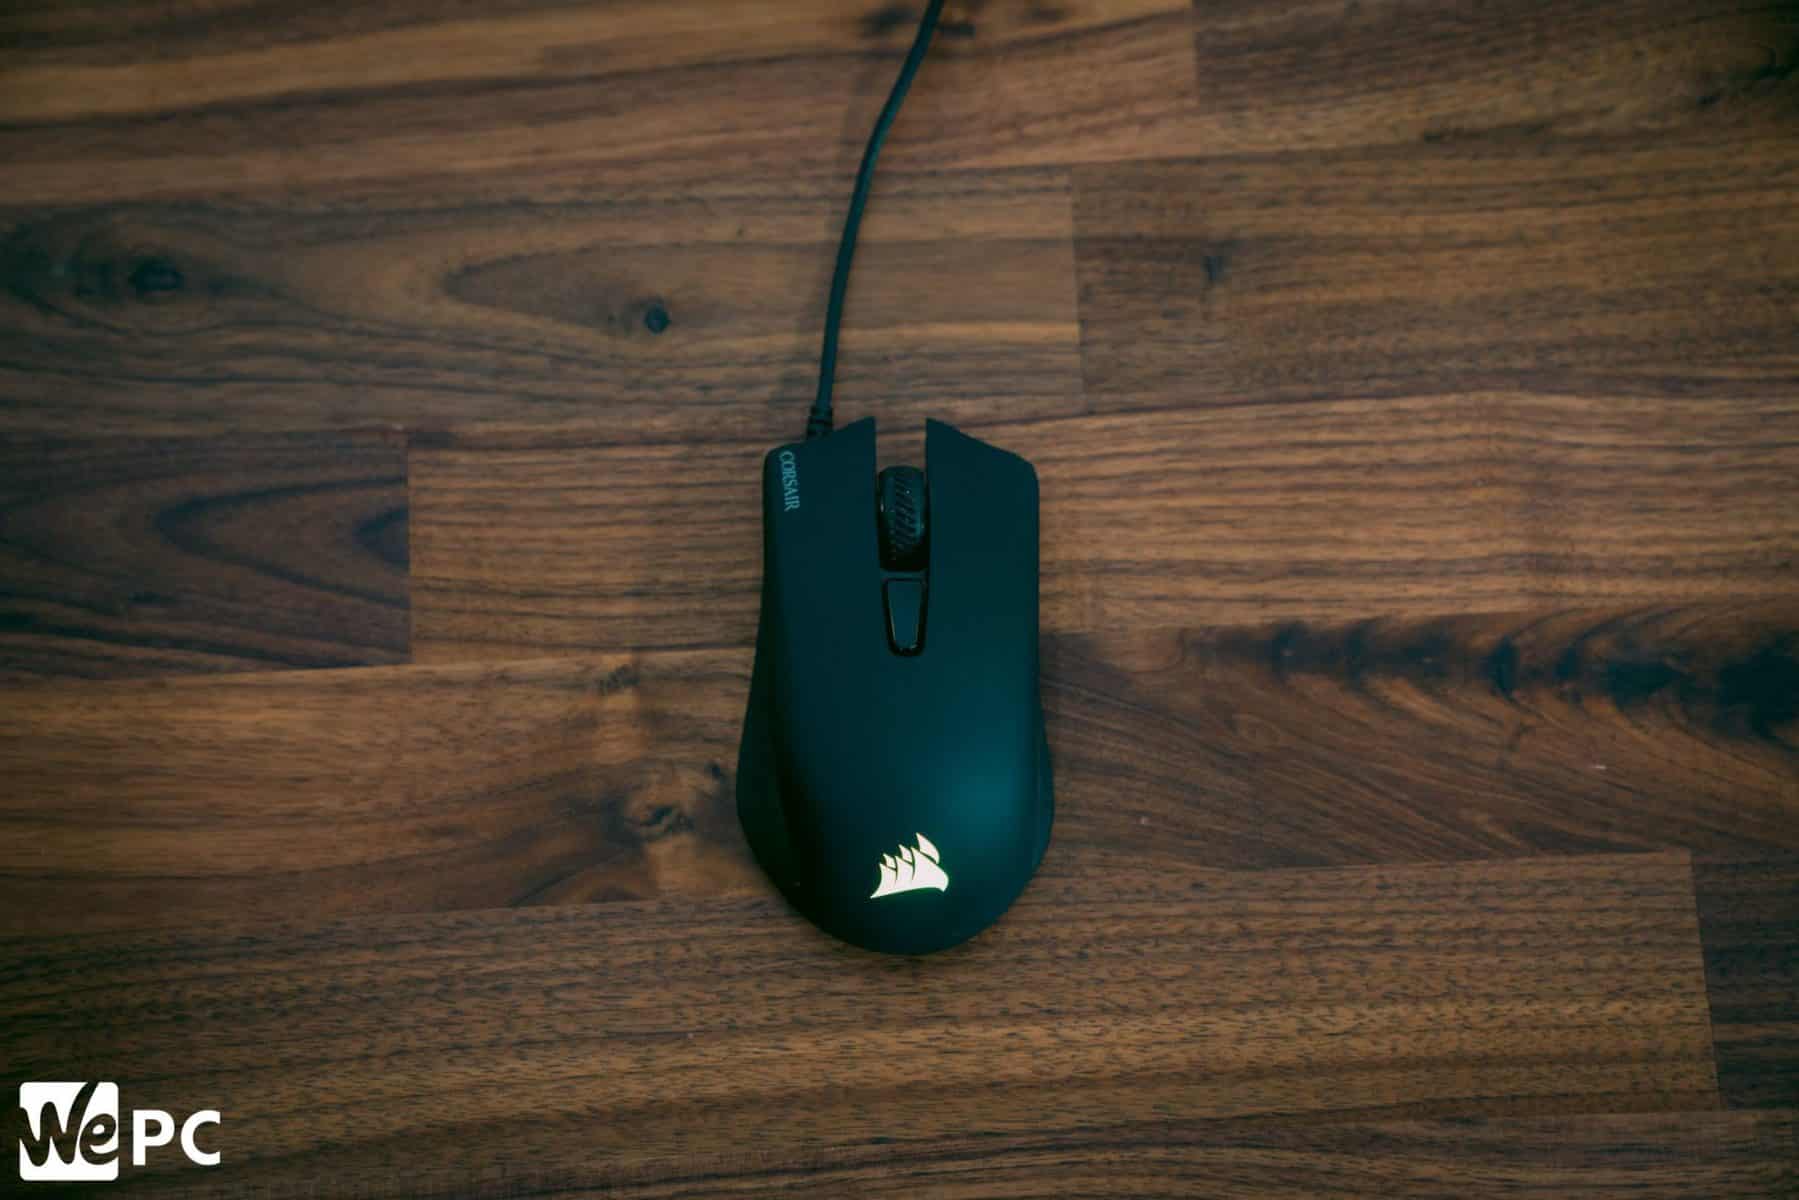 corsair harpoon mouse not working on ps4